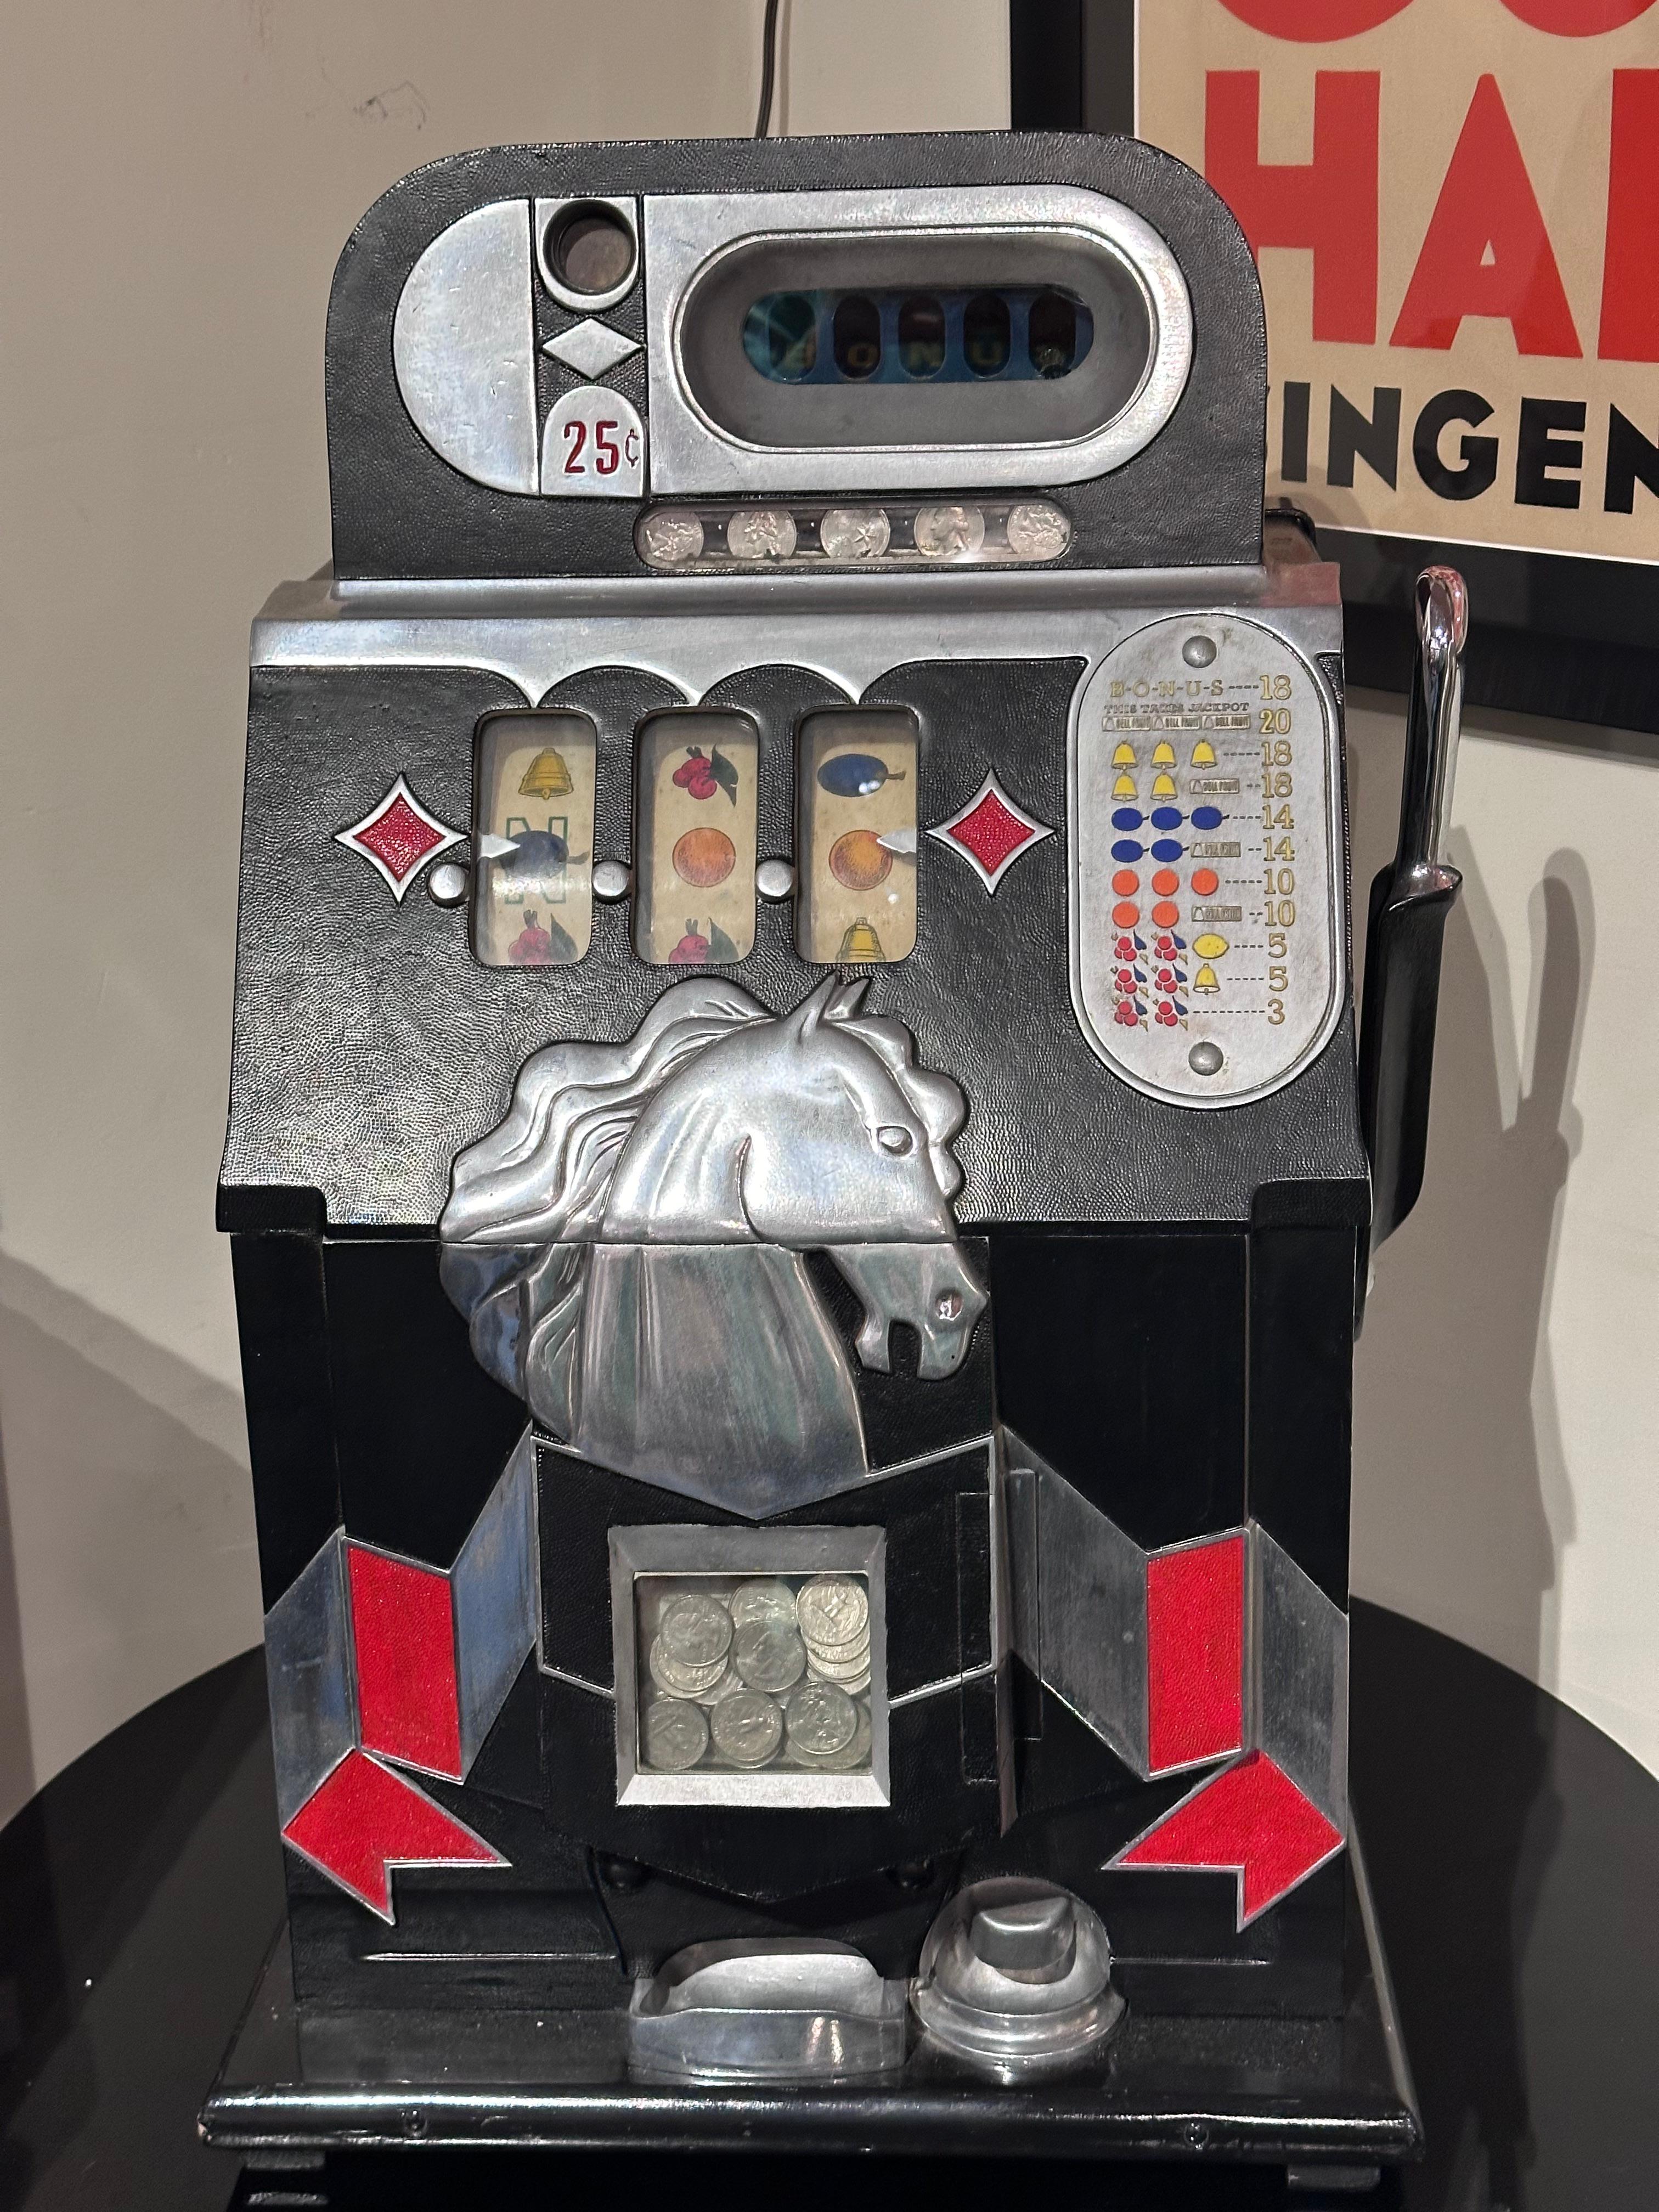 This 25-cent Mills Novelty Horsehead Slot Machine from around 1937, produced by the Mills Novelty Company in Chicago, Illinois, is a charming relic of the Art Deco era. Despite showing signs of use and age, it remains in very good original condition